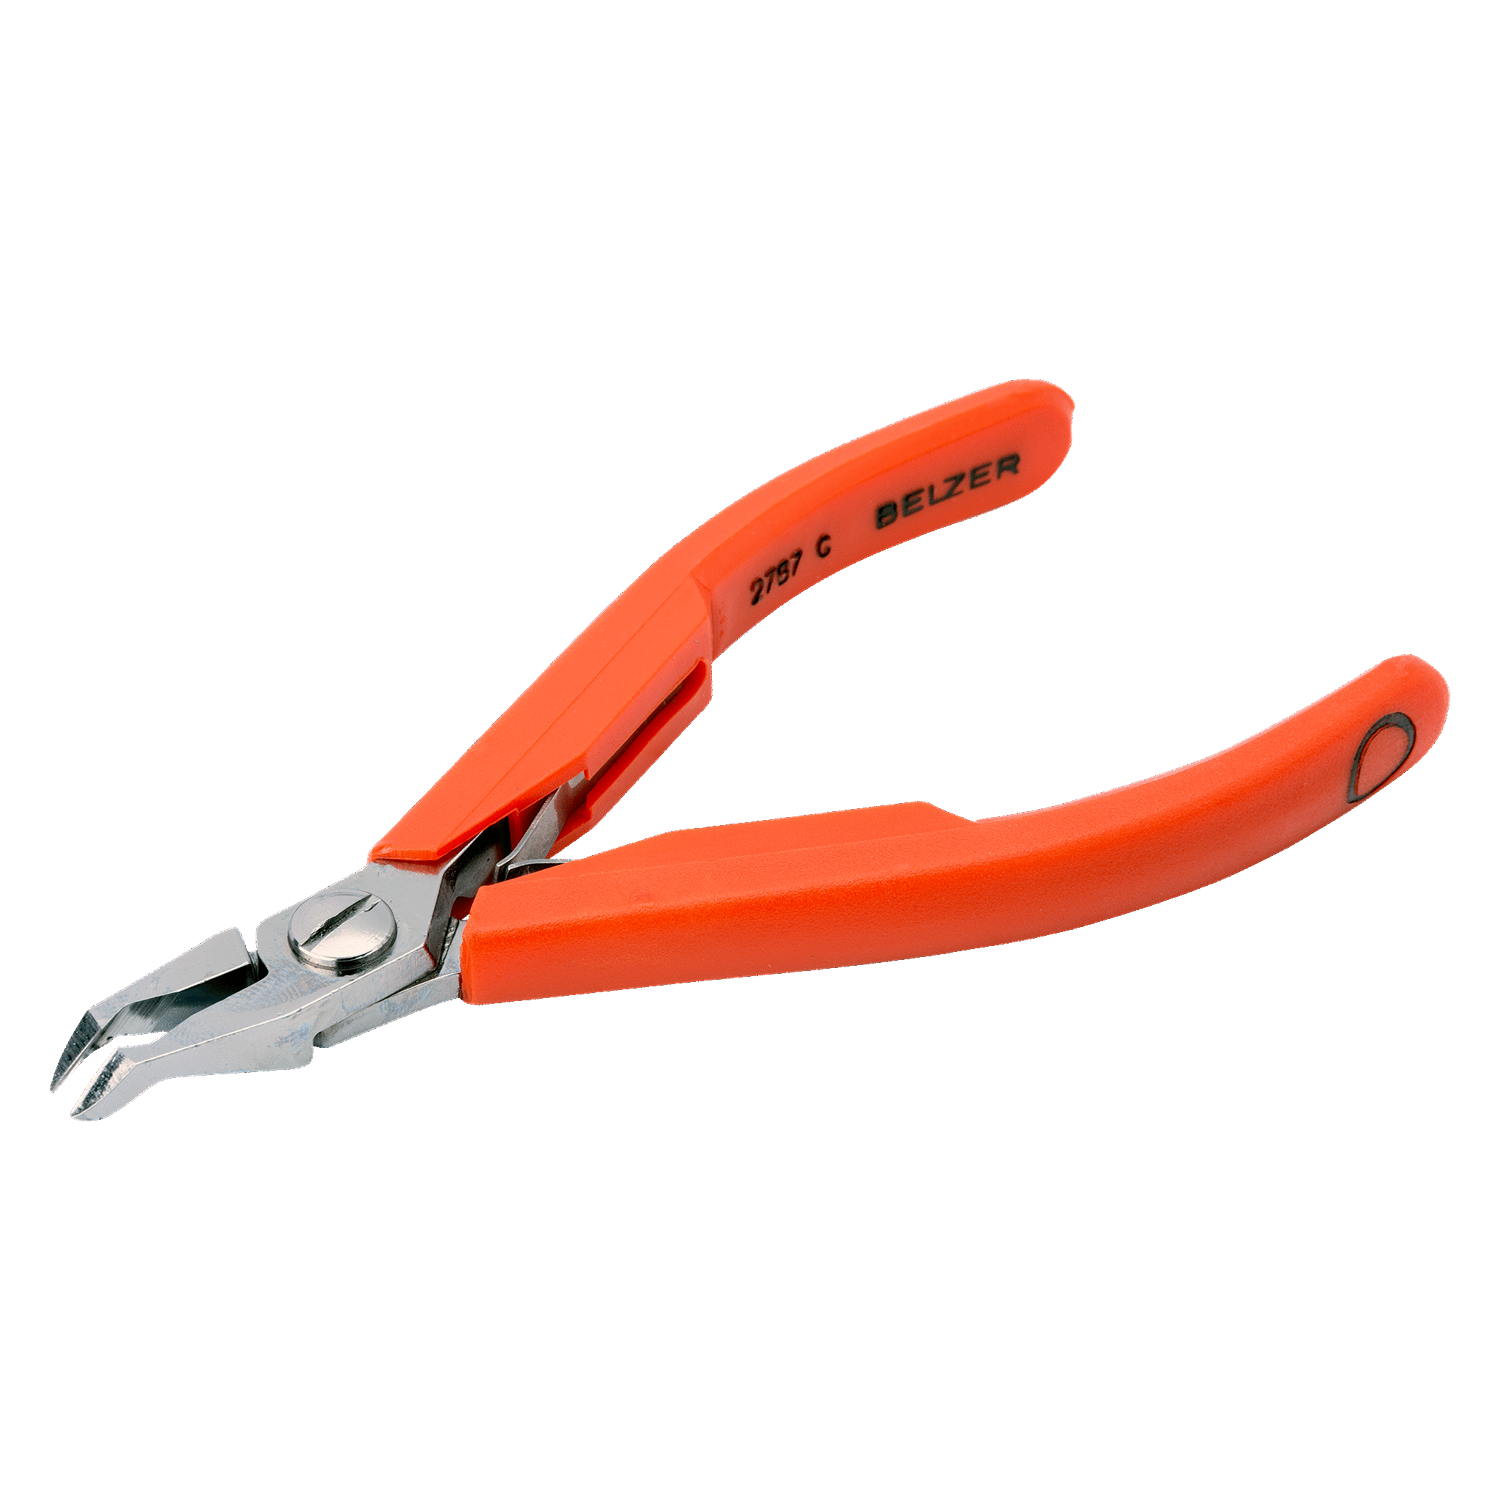 BAHCO 2787G 45° Oblique Cutter with Relieved Cutting Pliers - Premium Oblique Cutter from BAHCO - Shop now at Yew Aik.